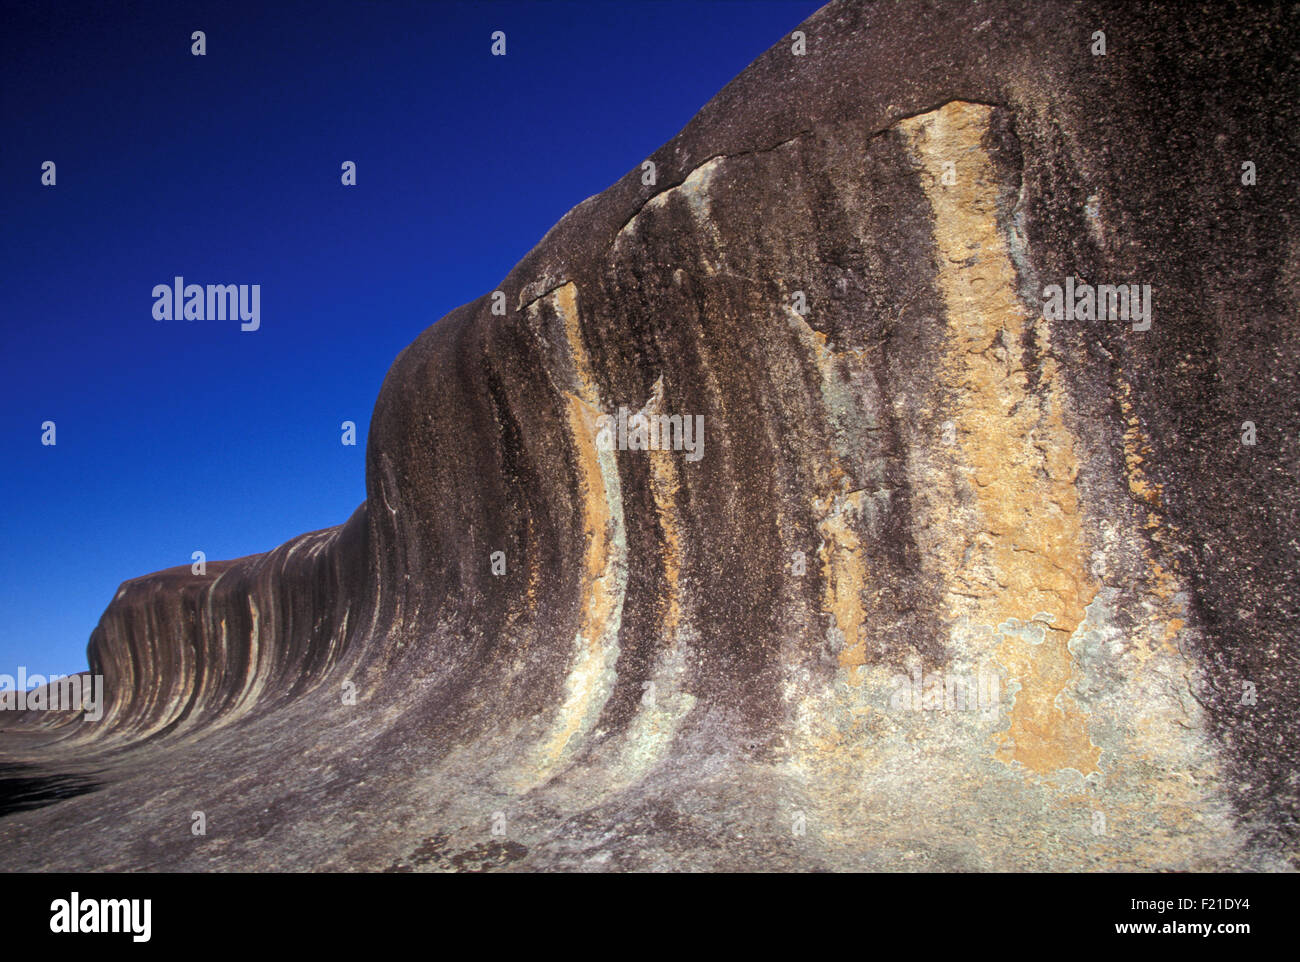 Wave Rock (also known as Hyden Rock) 296 kms east south east of Perth, Western Australia Stock Photo